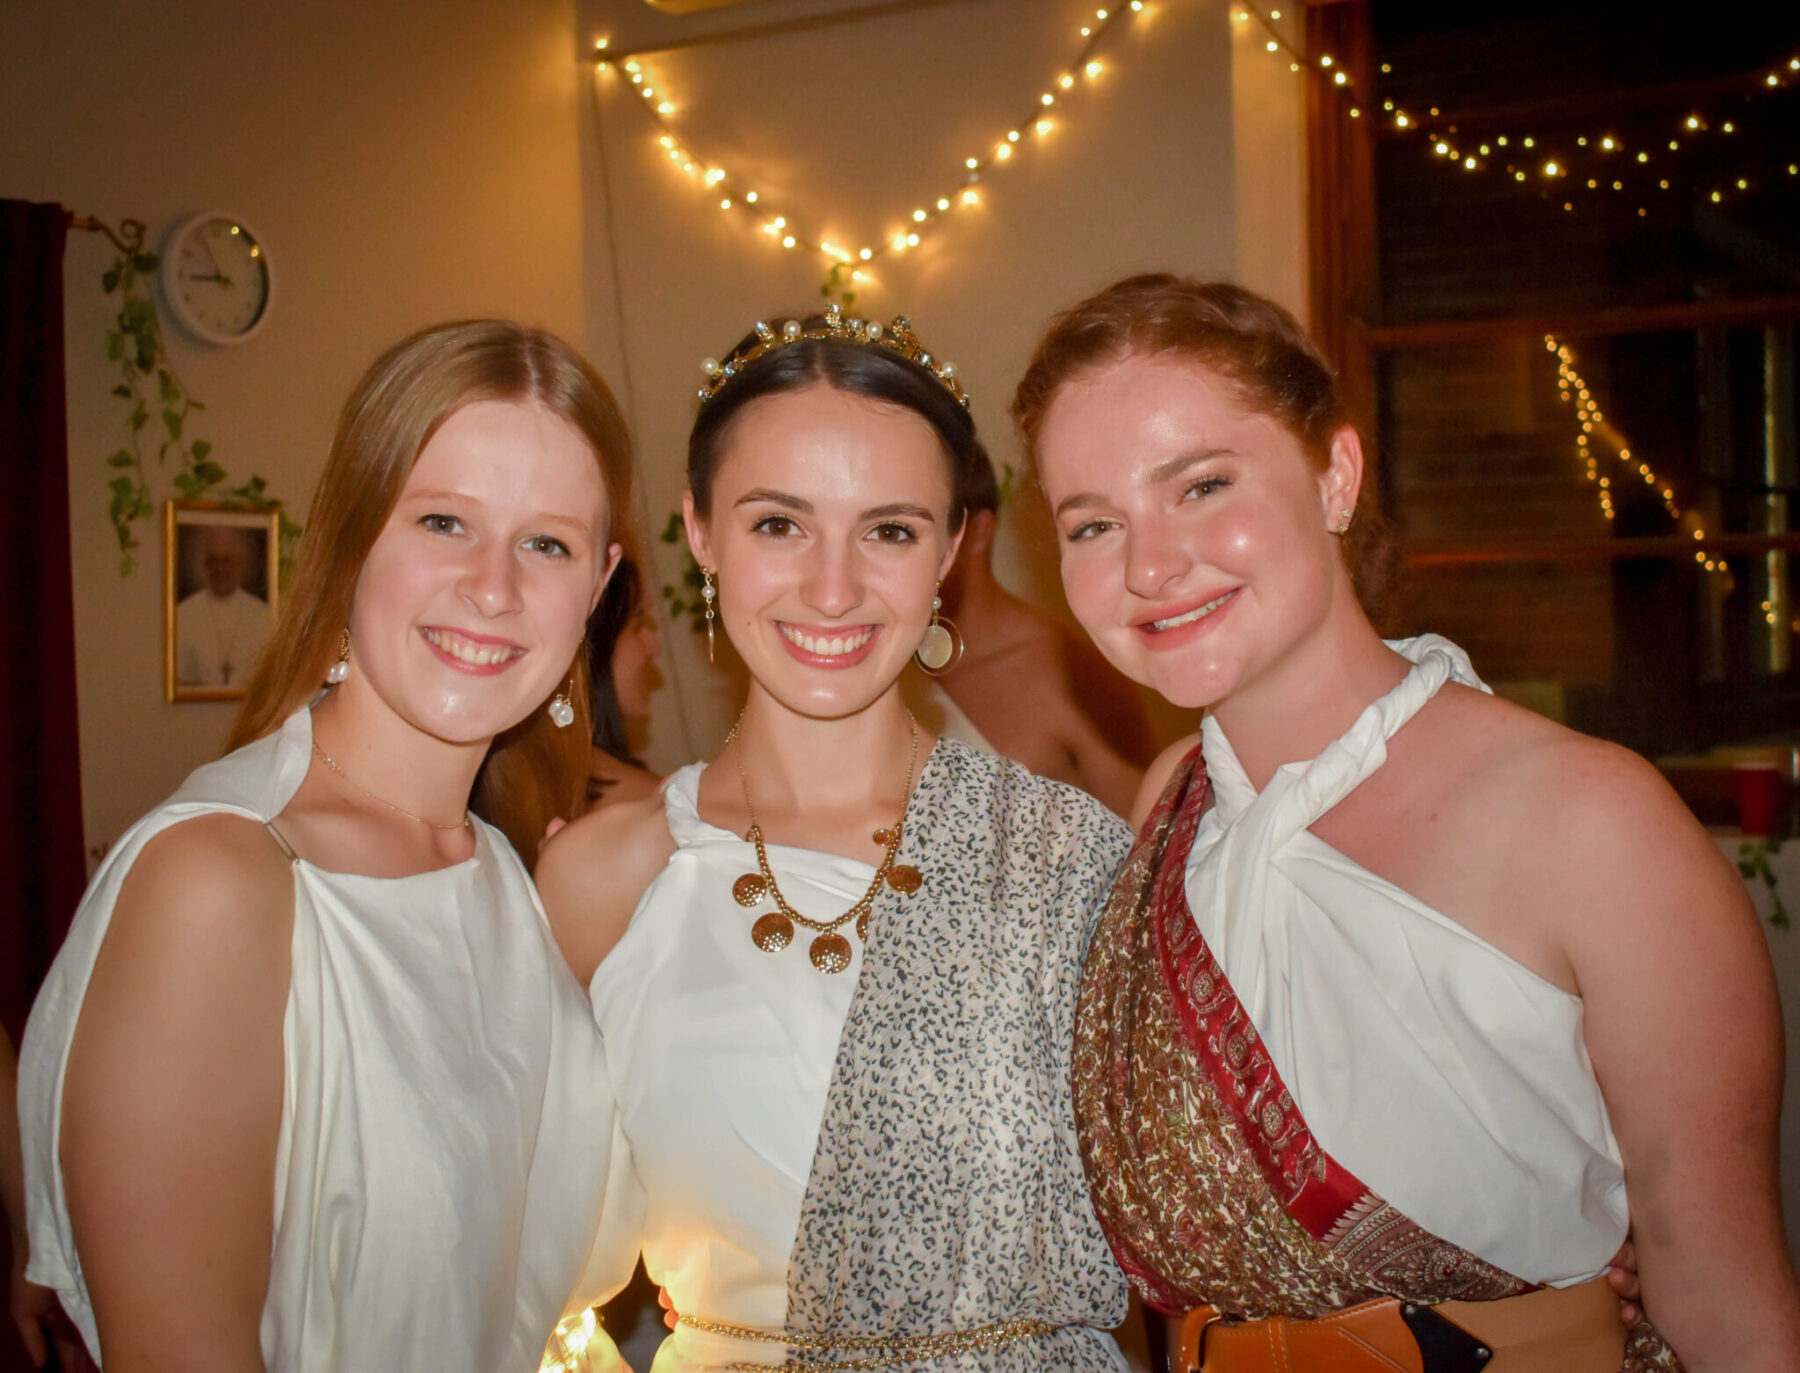 Classics-Week-Toga-Party-2021-Edited-26-scaled-1. Campion College Australia.